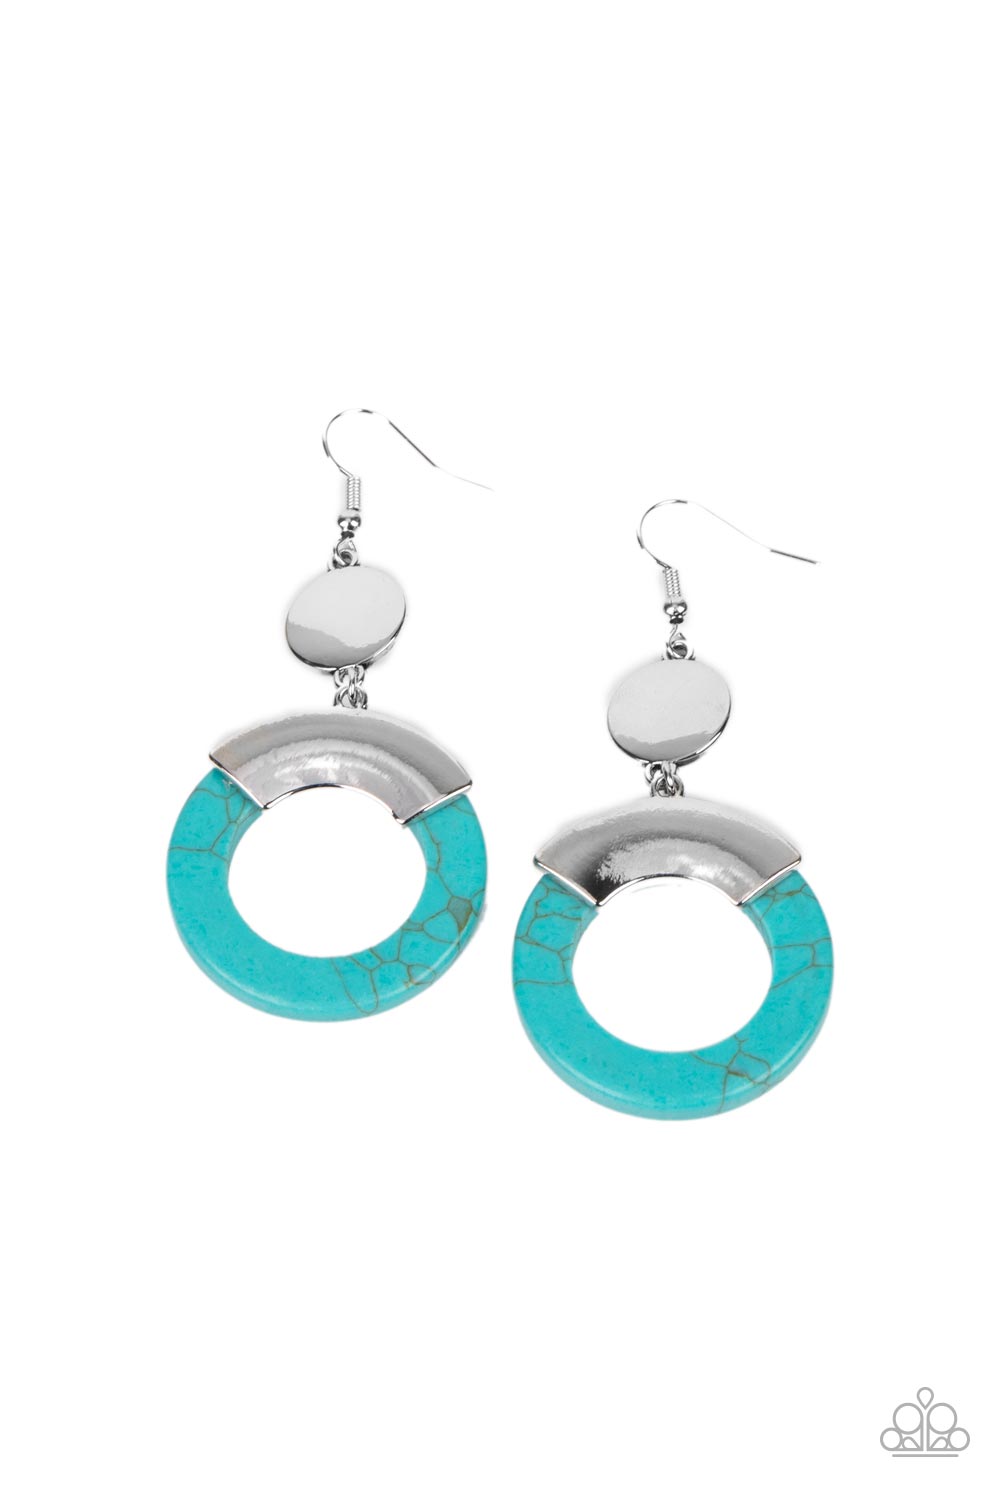 ENTRADA at Your Own Risk Blue Earrings Paparazzi